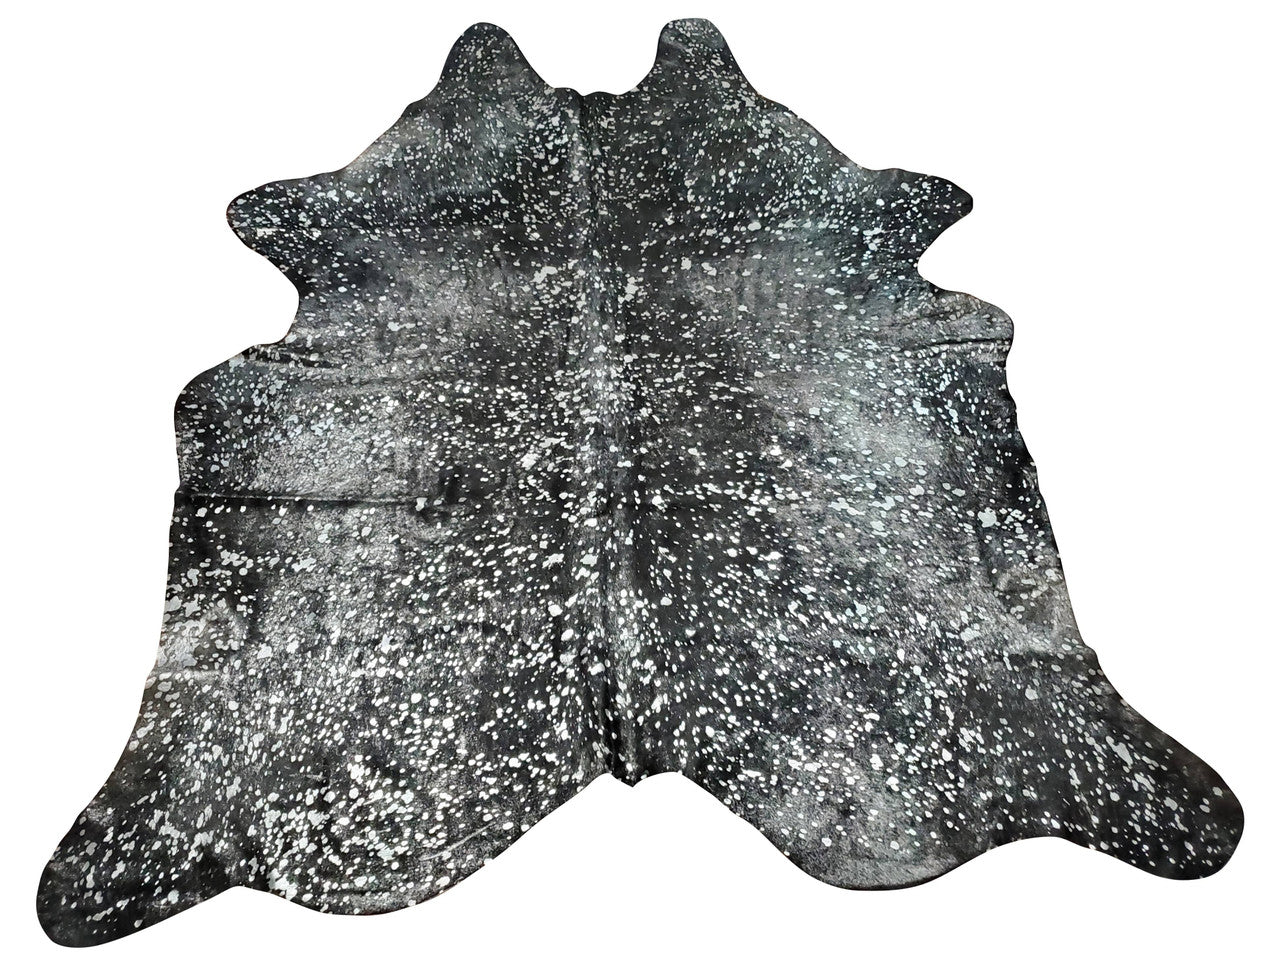 A very beautiful black cowhide rug washed in stunning silver metallic. This authentic cowhide is so beautiful it will go with most of the decor making it an exotic place, add it to a neutral living room or rustic style man cave, this piece of nature is one of its kind and very rare. 